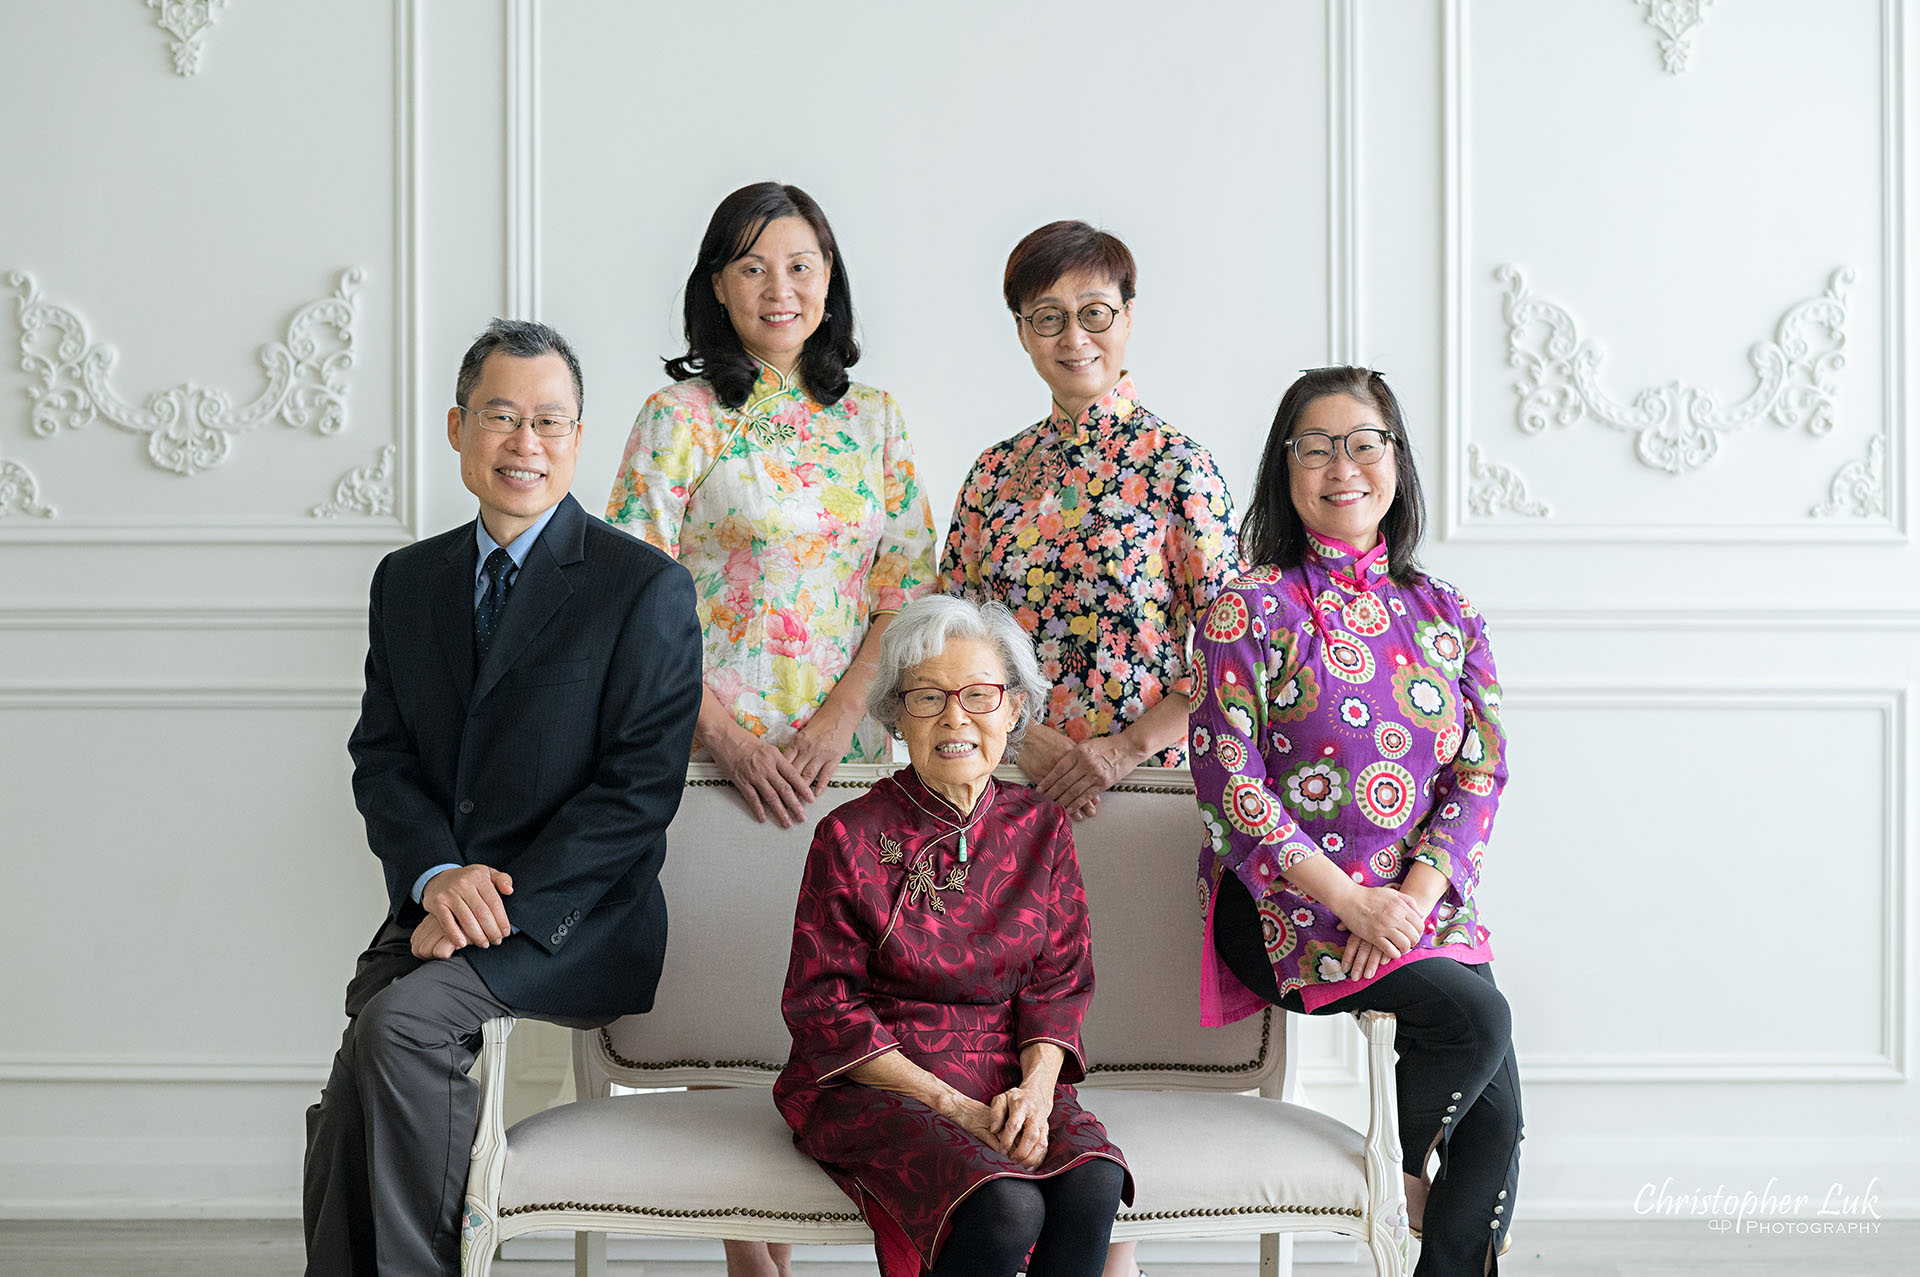 Grandmother Grandma Aunts Uncle Son Daughters Brother Sisters Group Family Photo Cheongsam QiPao Traditional Chinese Dress